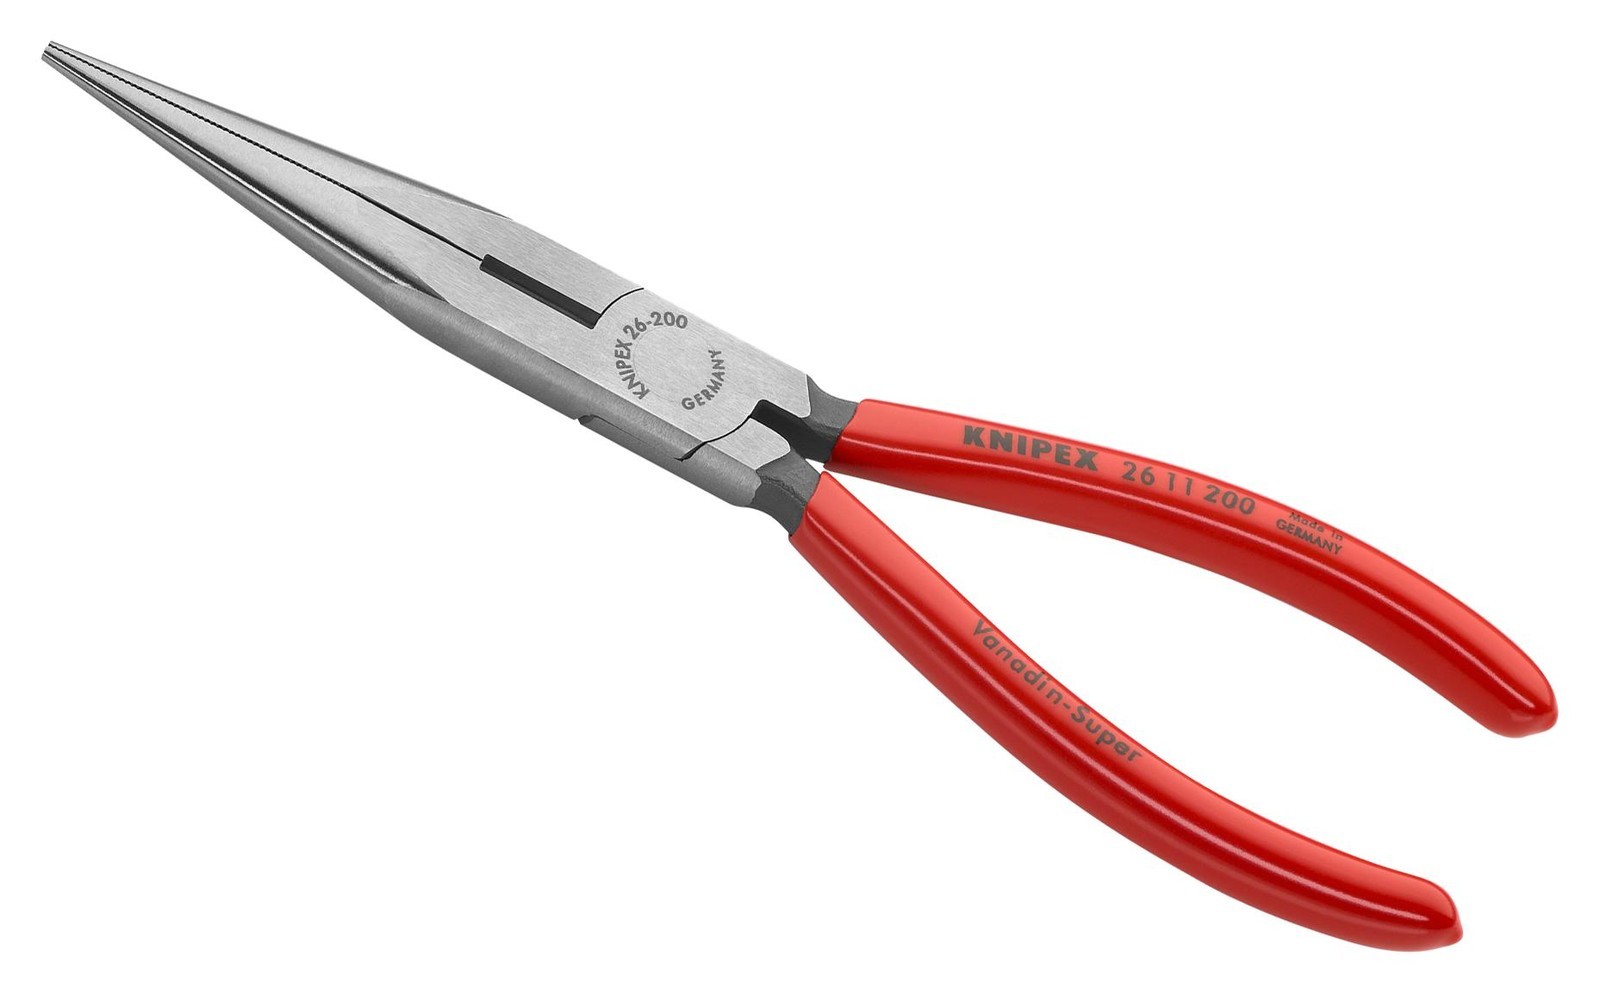 Knipex 26 11 200 Sba Snipe Nose Side Cutting Plier, 8